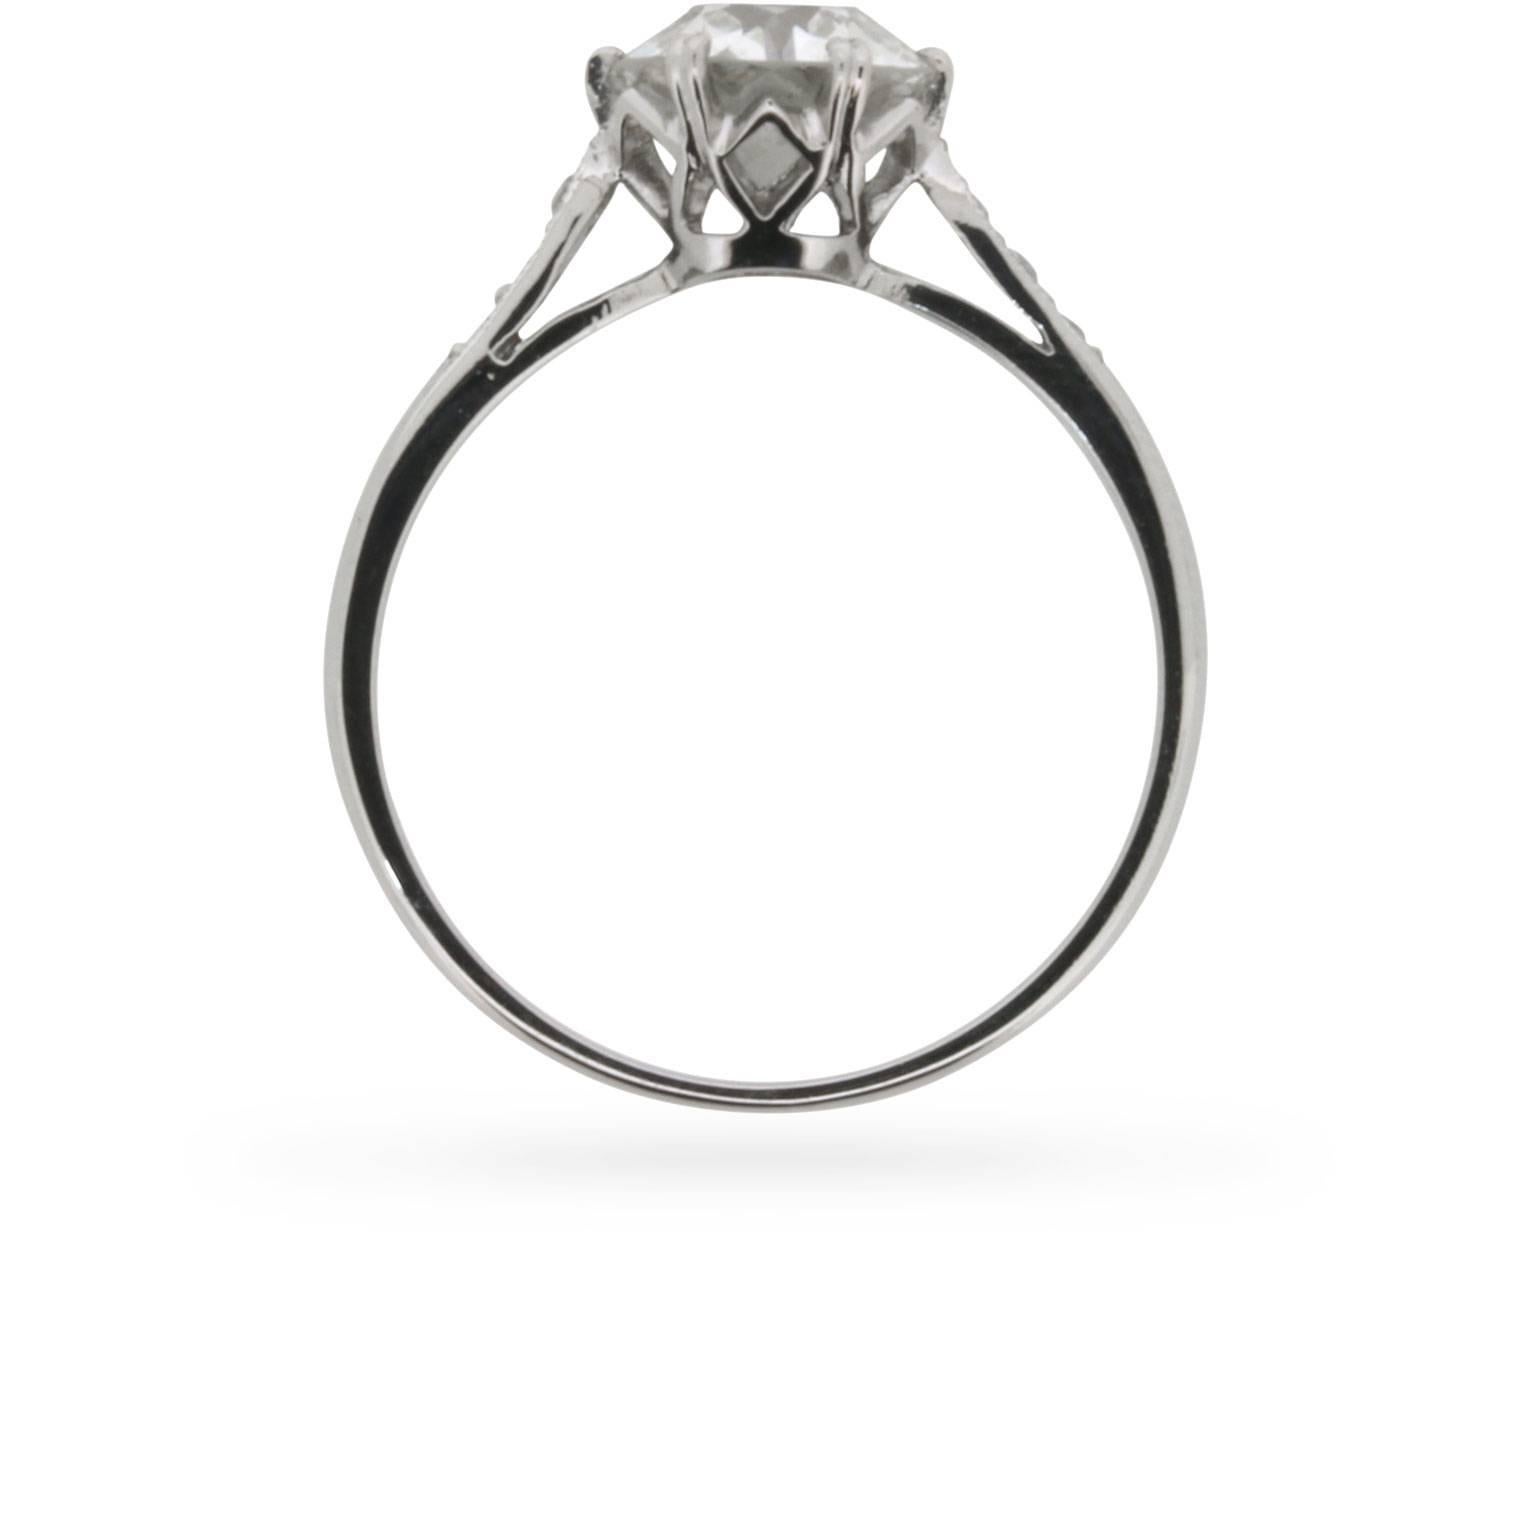 This stunning and elegant solitaire ring has a beautiful 1.51 carat diamond as the main attraction. The old cut diamond would have been hand cut, and hand set within the crafted mount. The stone has been certified as a H colour and clarity VS1. It